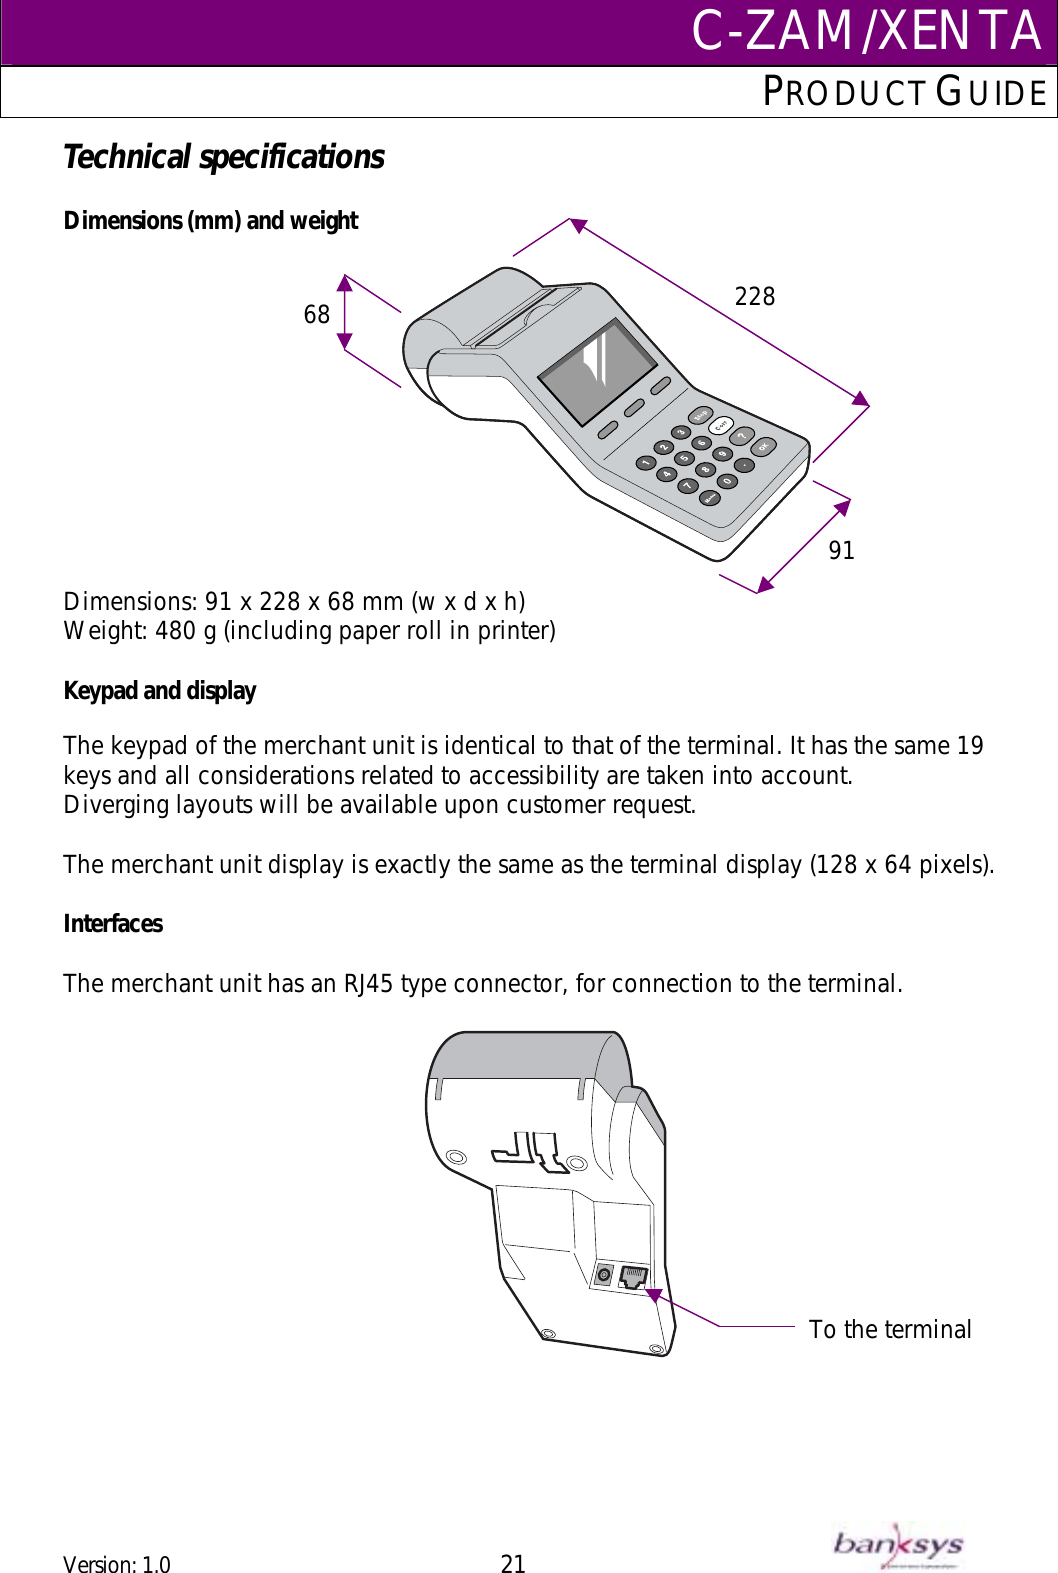 C-ZAM/XENTAPRODUCT GUIDE  Technical specifications  Dimensions (mm) and weight   Dimensions: 91 x 228 x 68 mm (w x d x h) 68 91 228Weight: 480 g (including paper roll in printer)  Keypad and display  The keypad of the merchant unit is identical to that of the terminal. It has the same 19 keys and all considerations related to accessibility are taken into account. Diverging layouts will be available upon customer request.  The merchant unit display is exactly the same as the terminal display (128 x 64 pixels).  Interfaces  The merchant unit has an RJ45 type connector, for connection to the terminal.    To the terminalVersion: 1.0 21      